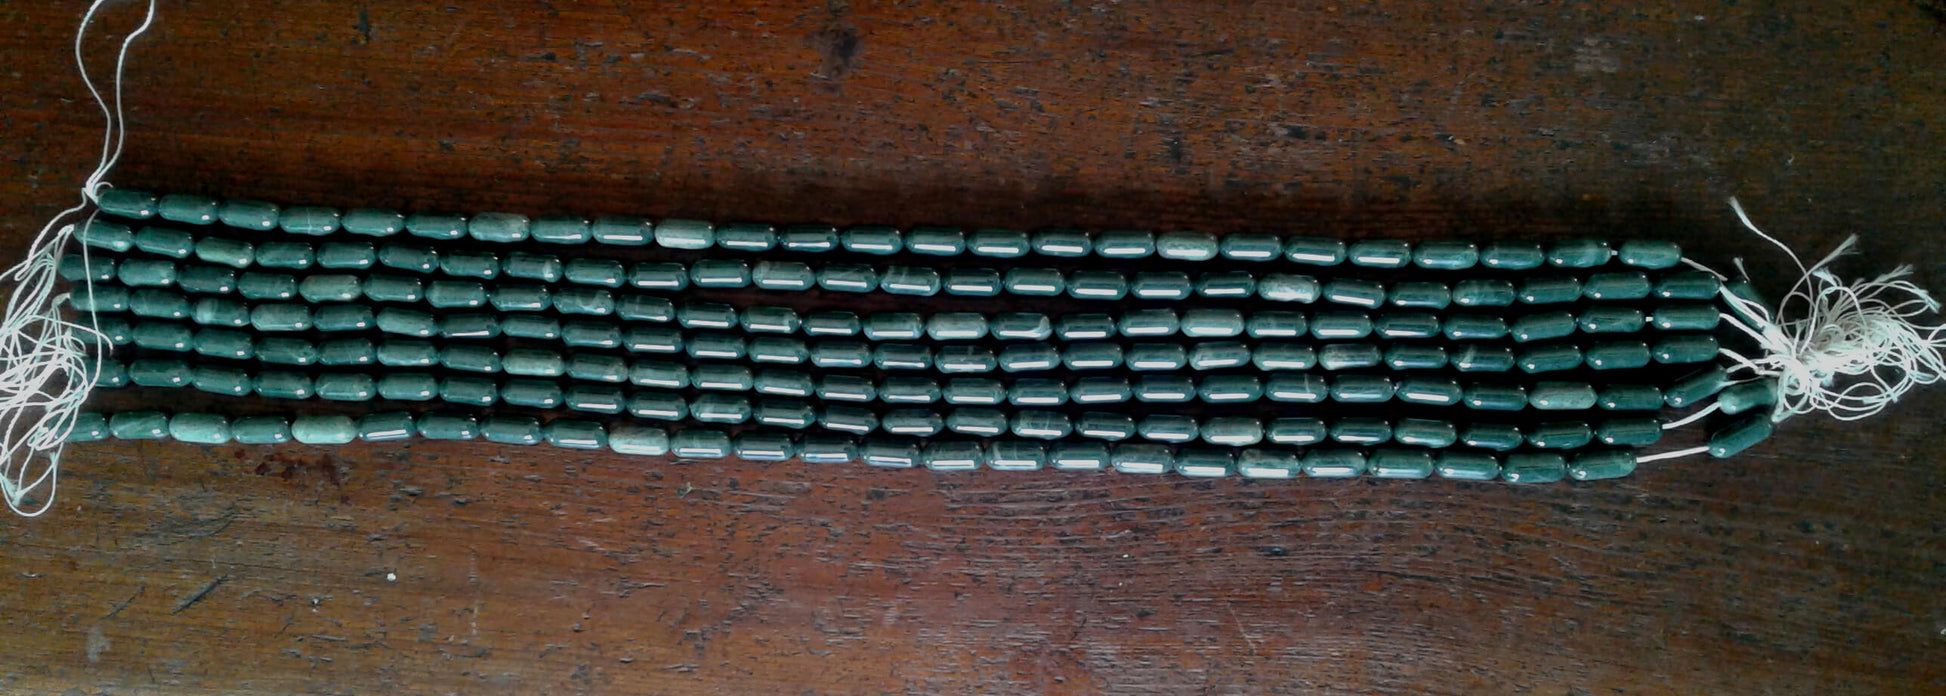 Exquisite California Jadeite beads.  Gun Blue Green color with White crystalline accents.  Tic tac shaped beads are over 1/2" long x 1/4" diameter.  Strands are 16" in length.  Artisan quality.  Sourced from Clear Creek, in the San Panoche Mountains of San Benito County, CA